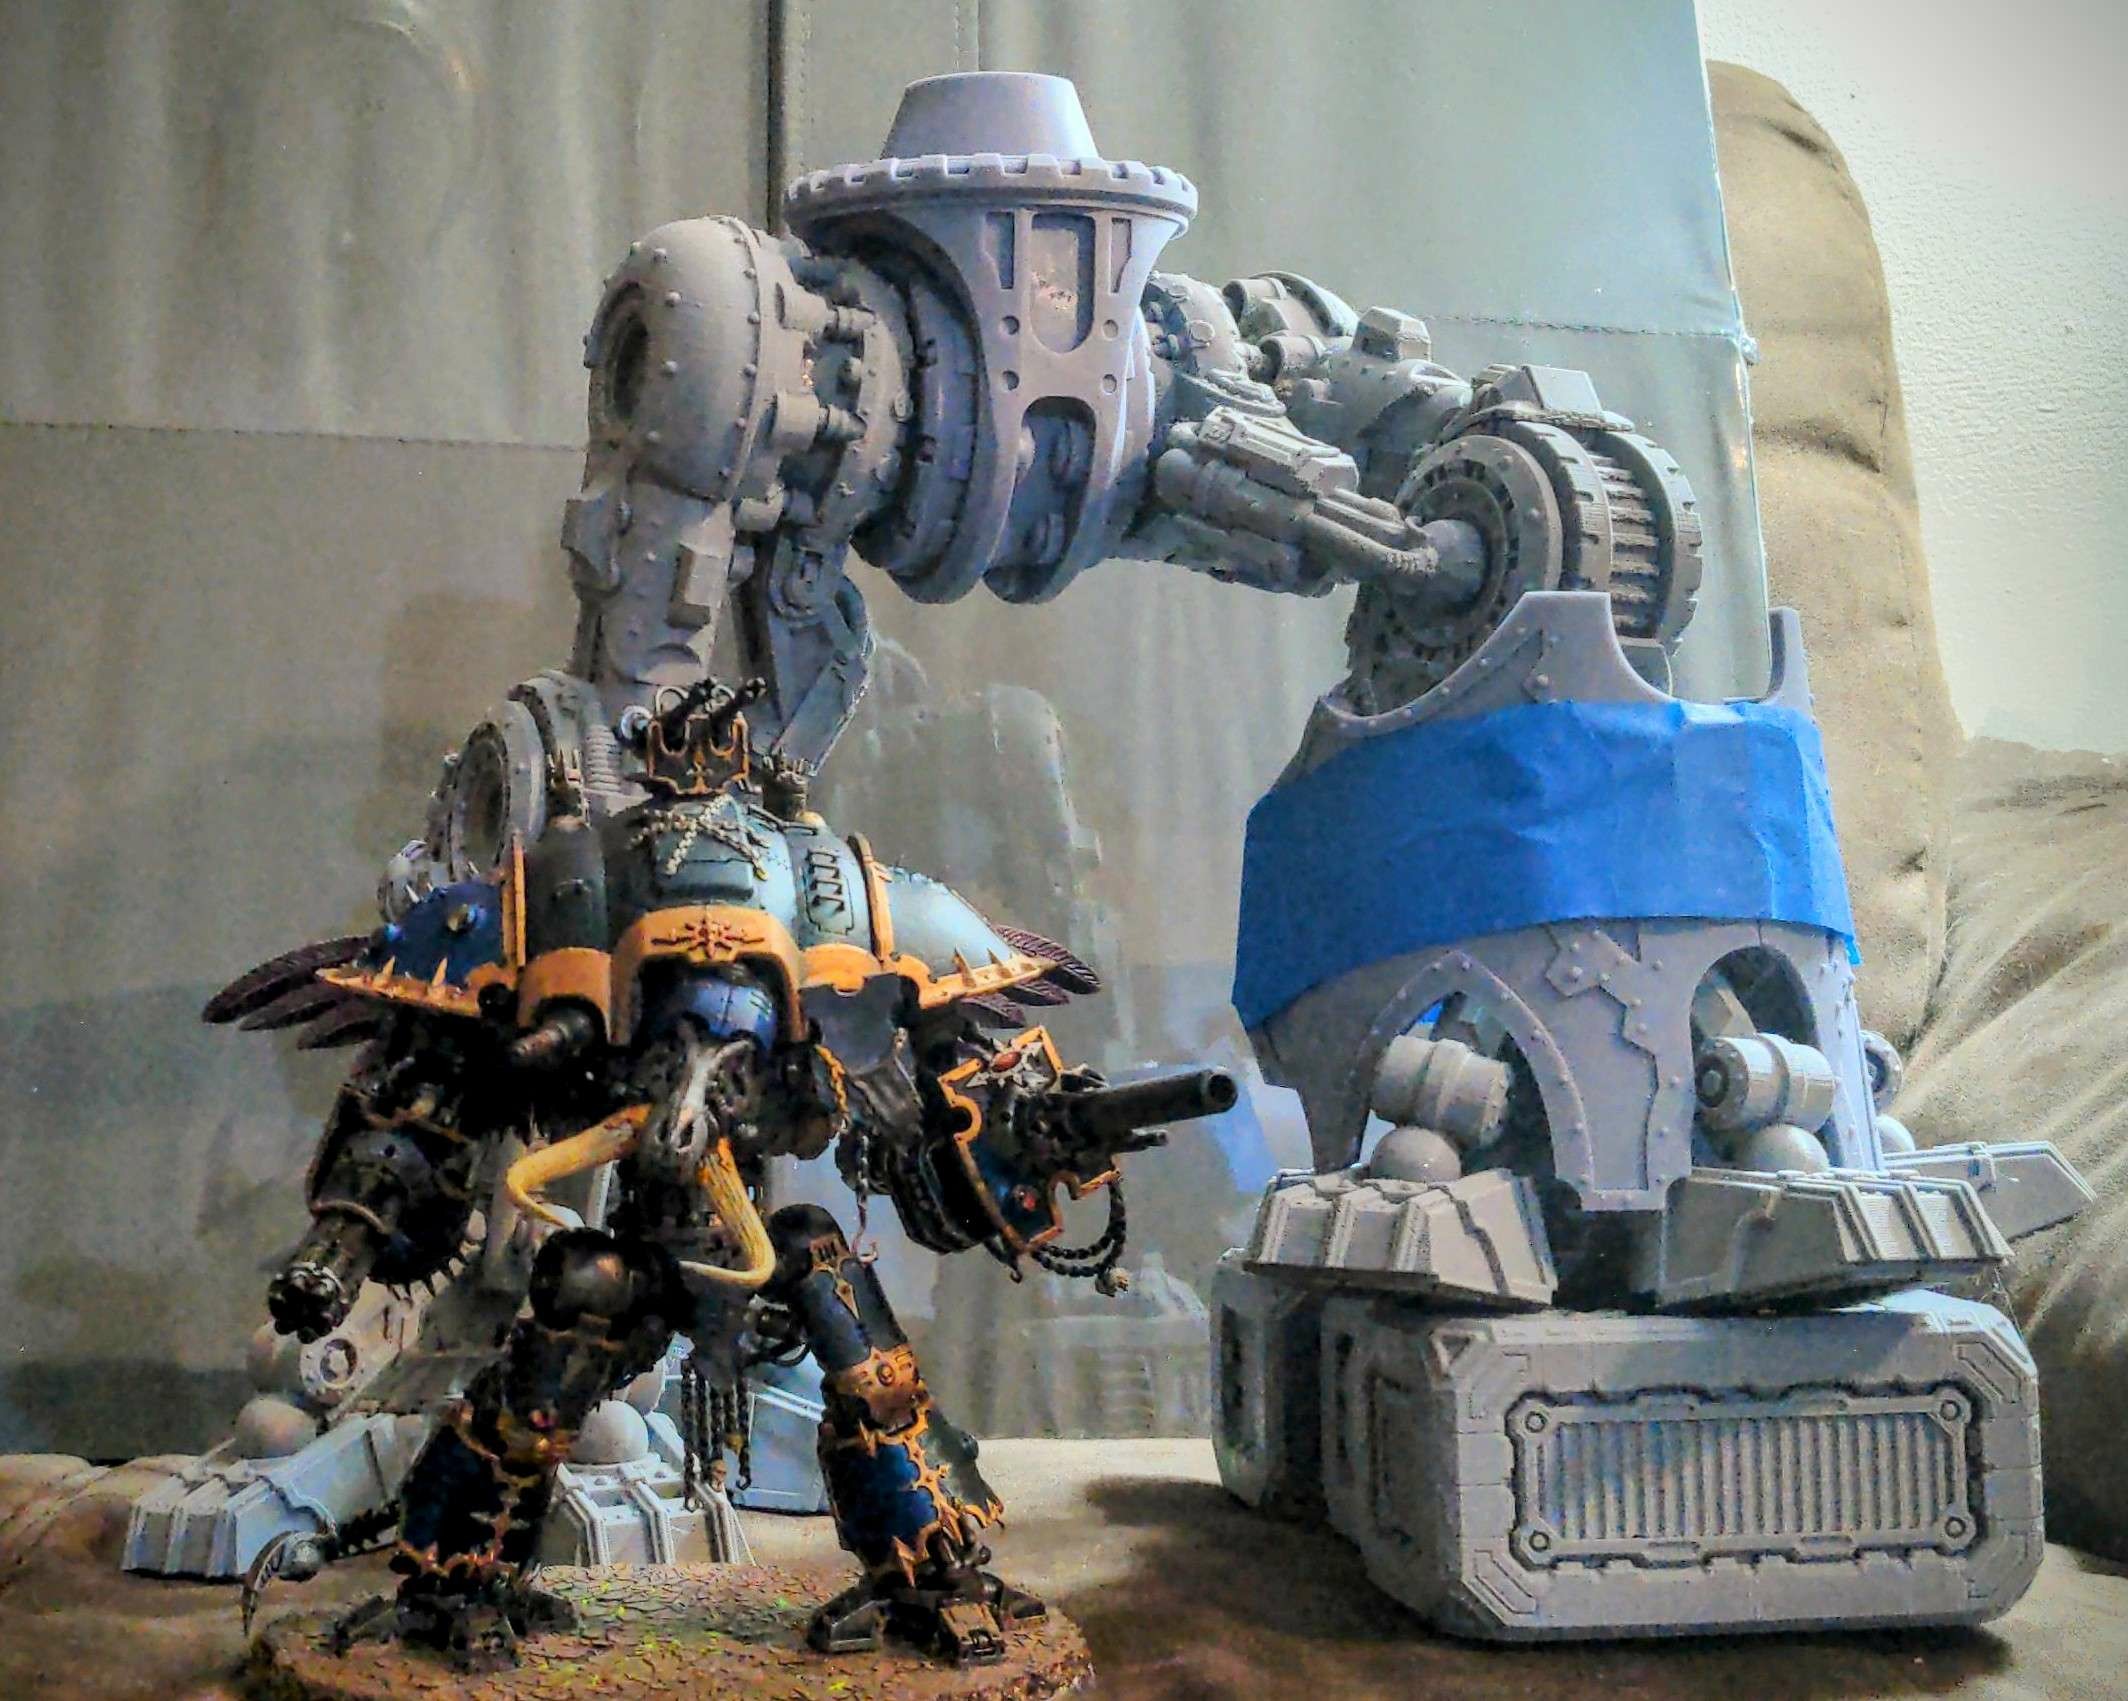 3d printed Warmaster Titan model with a Chaos Knight model in front of it for size comparison. The top of the Knight model barely comes up to the Titan's knee joint.